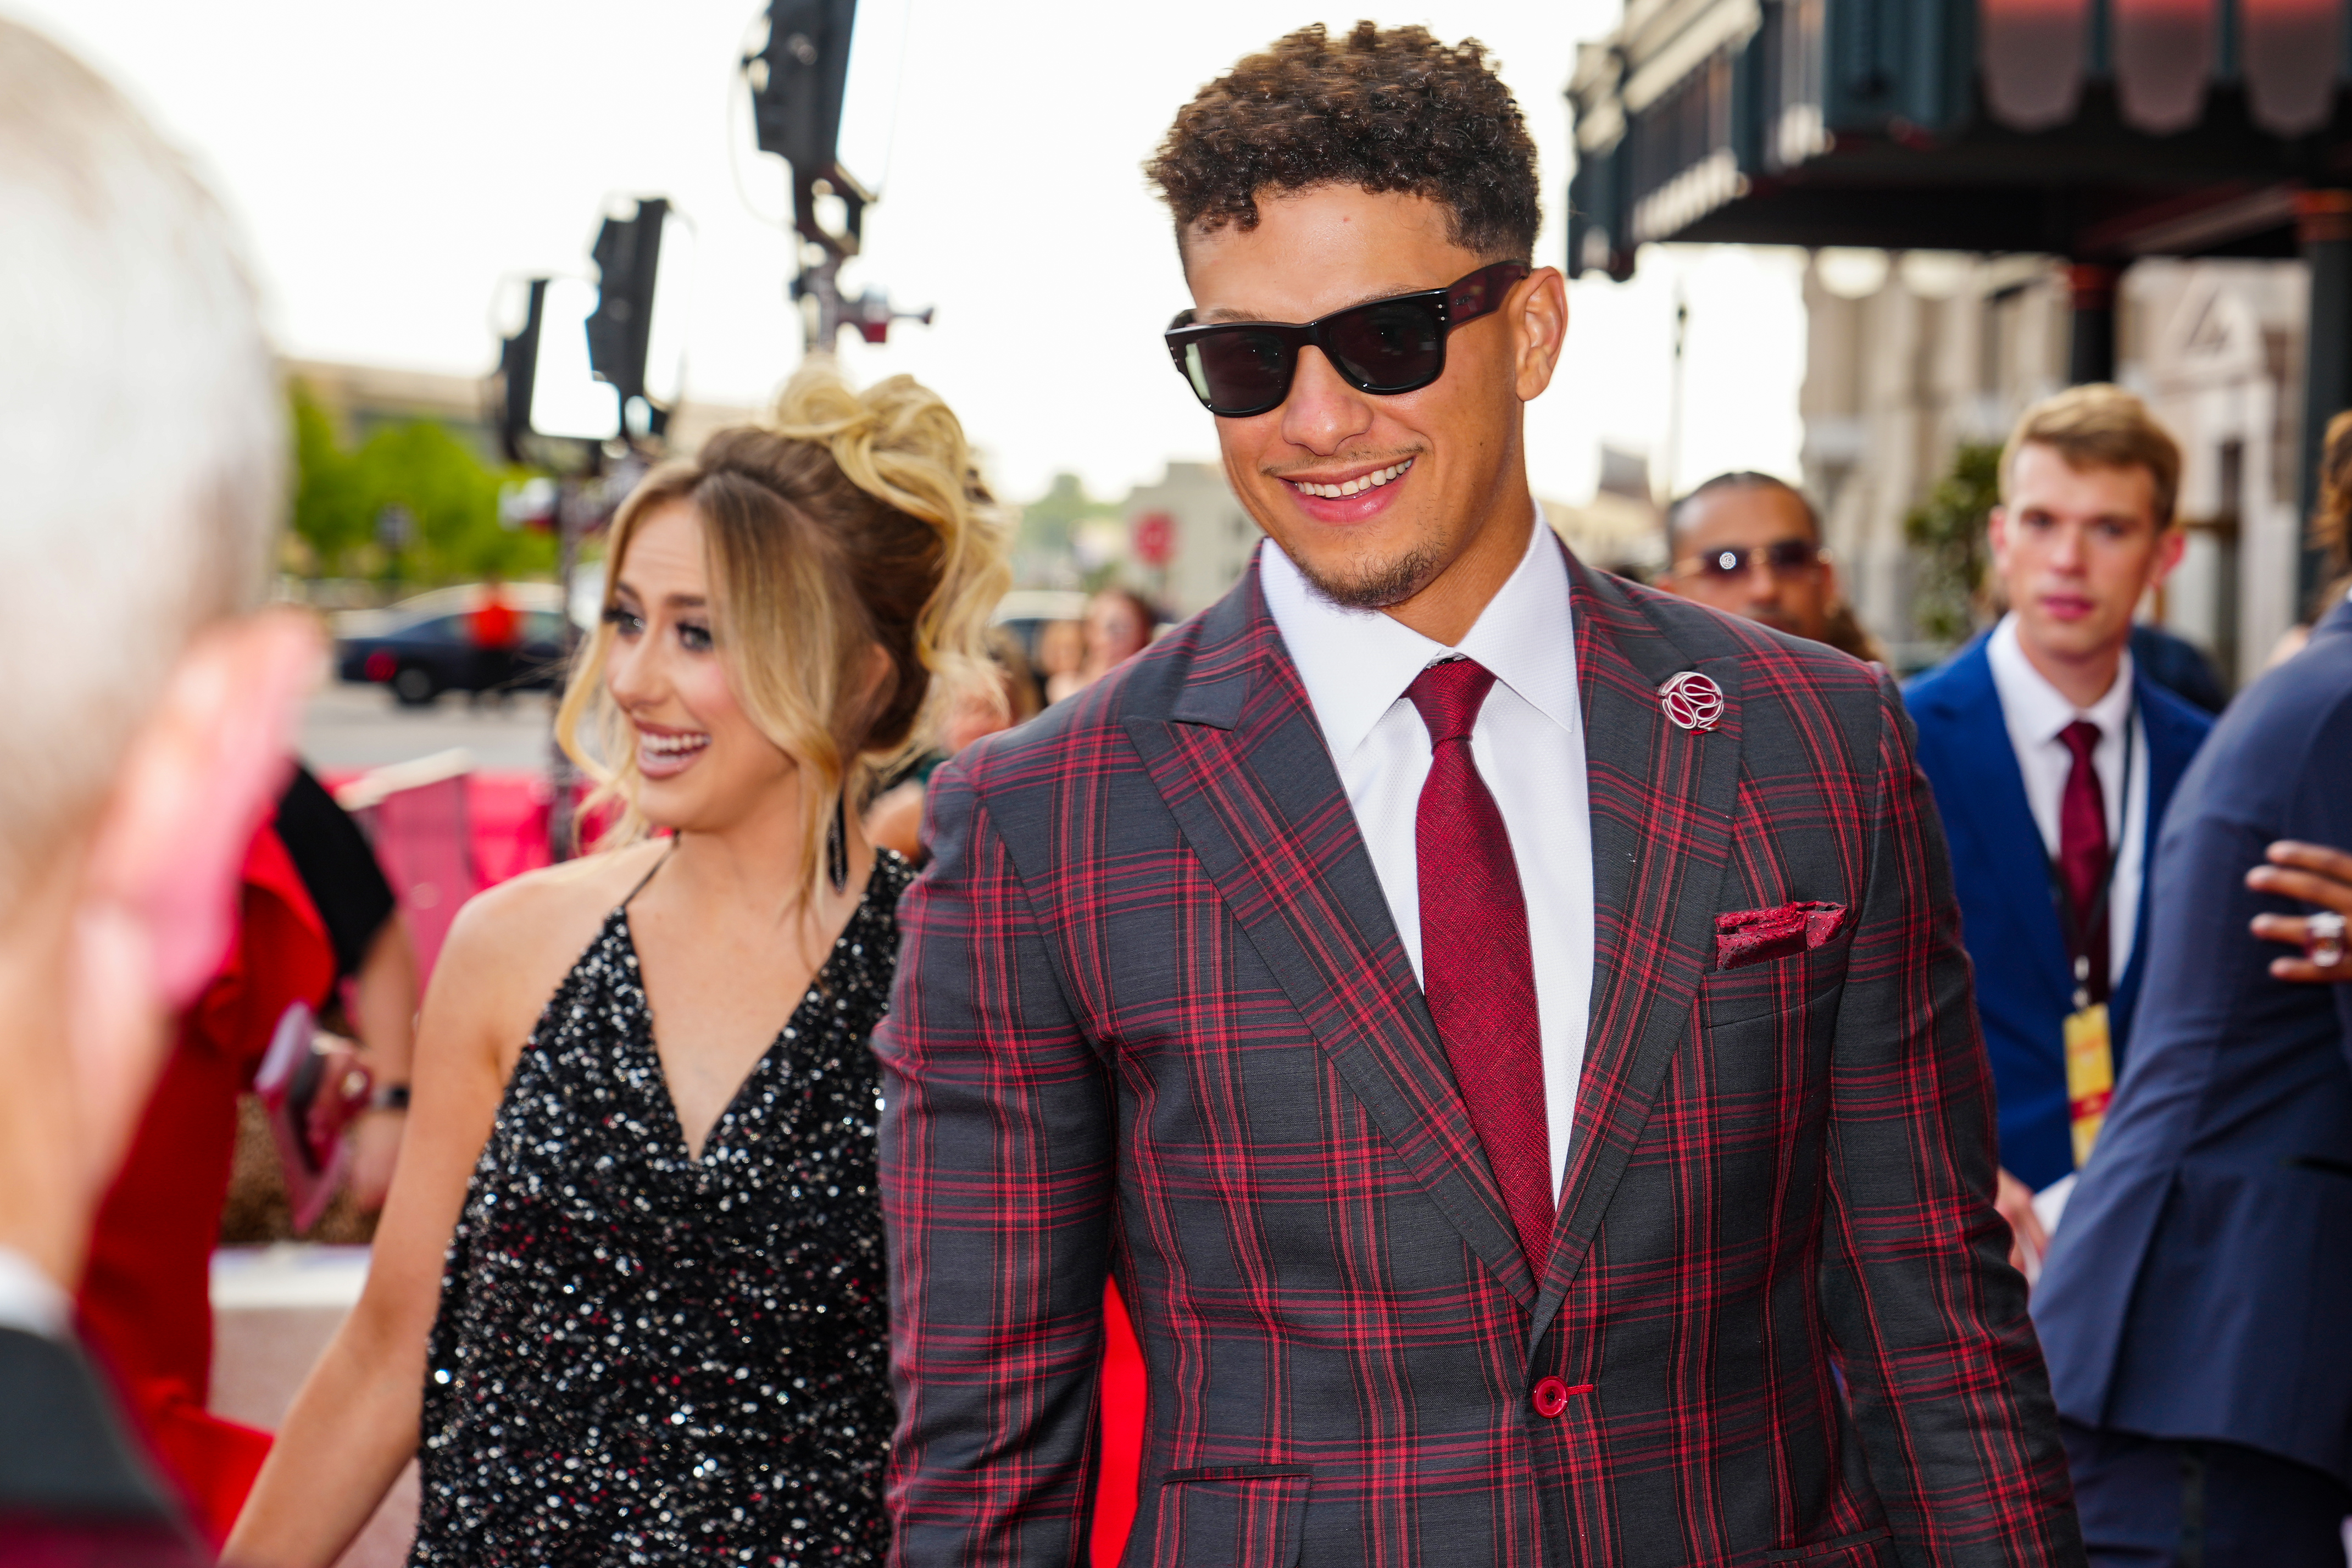 Patrick Mahomes and his wife Brittany grace the red carpet at the Kansas City Chiefs' ring ceremony on June 15, 2023, in Kansas City, Missouri | Source: Getty Images